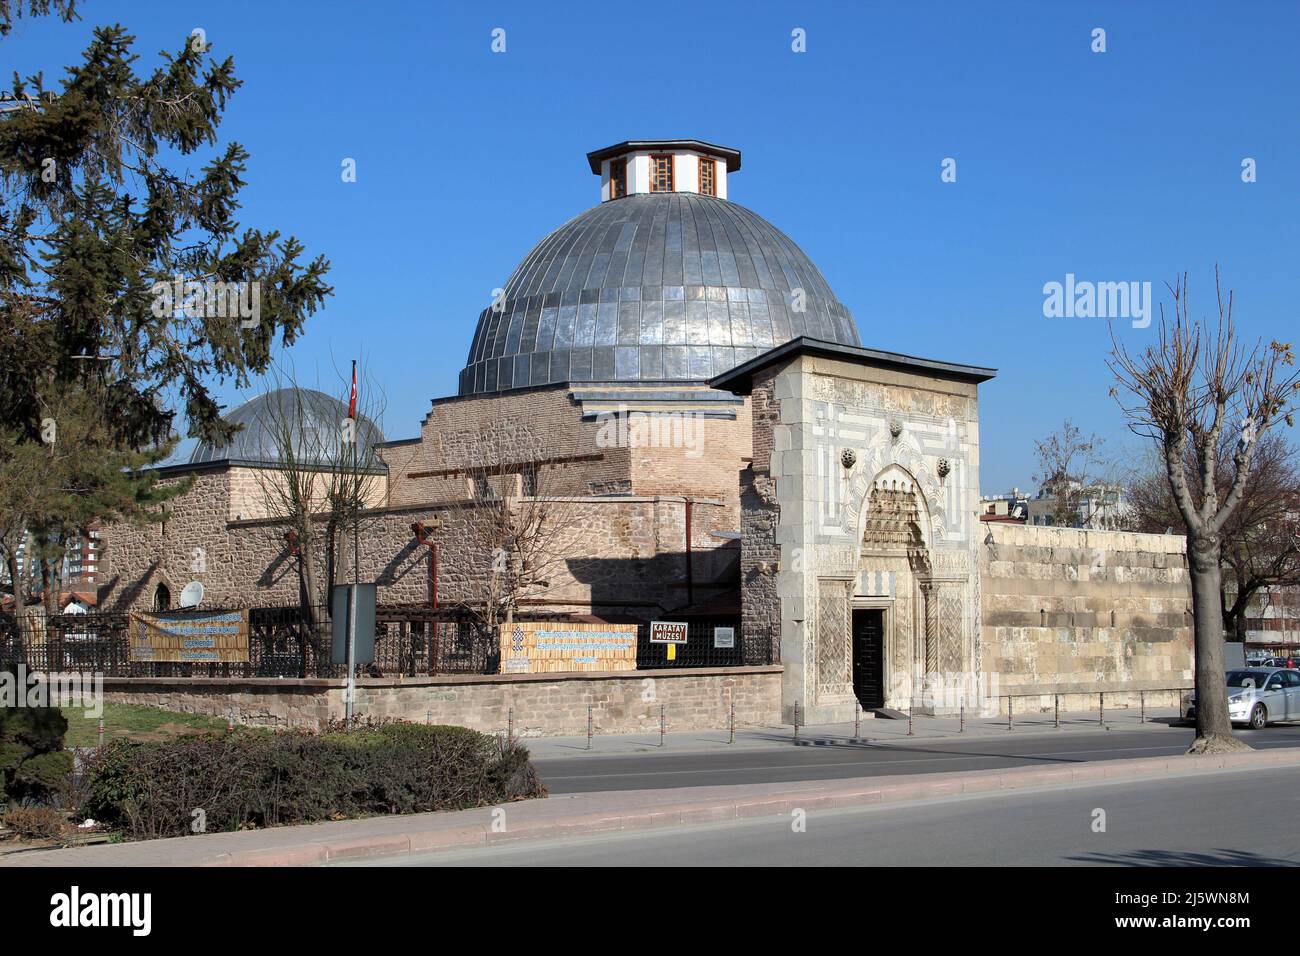 Karatay Madrasah vire in Konya. Konya is populer tourist destination in Turkey. The madrasa was built in the Middle Ages during the Seljuk period. Stock Photo